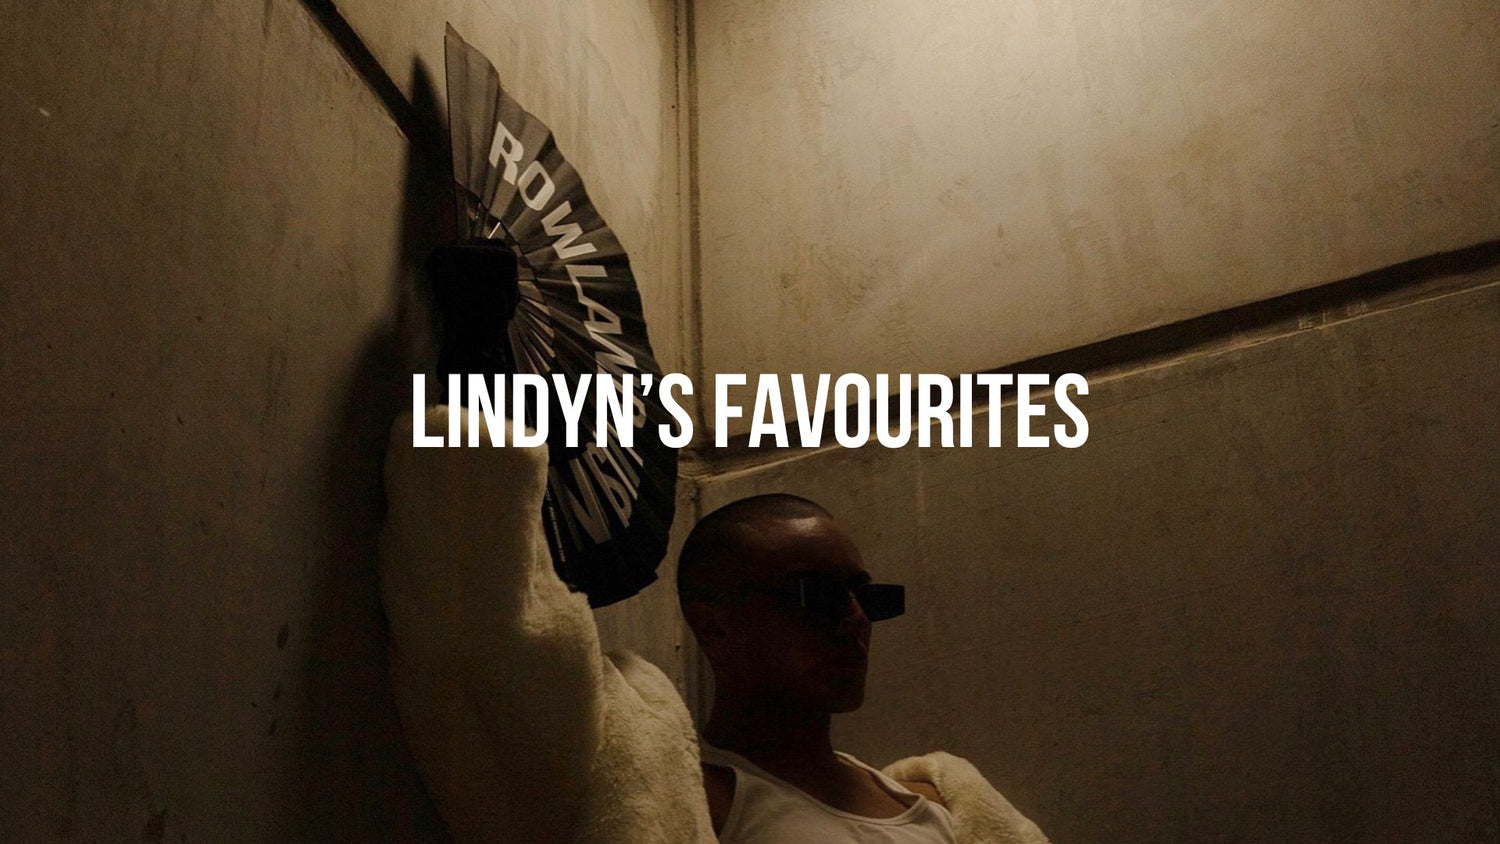 LINDYN'S FAVOURITES